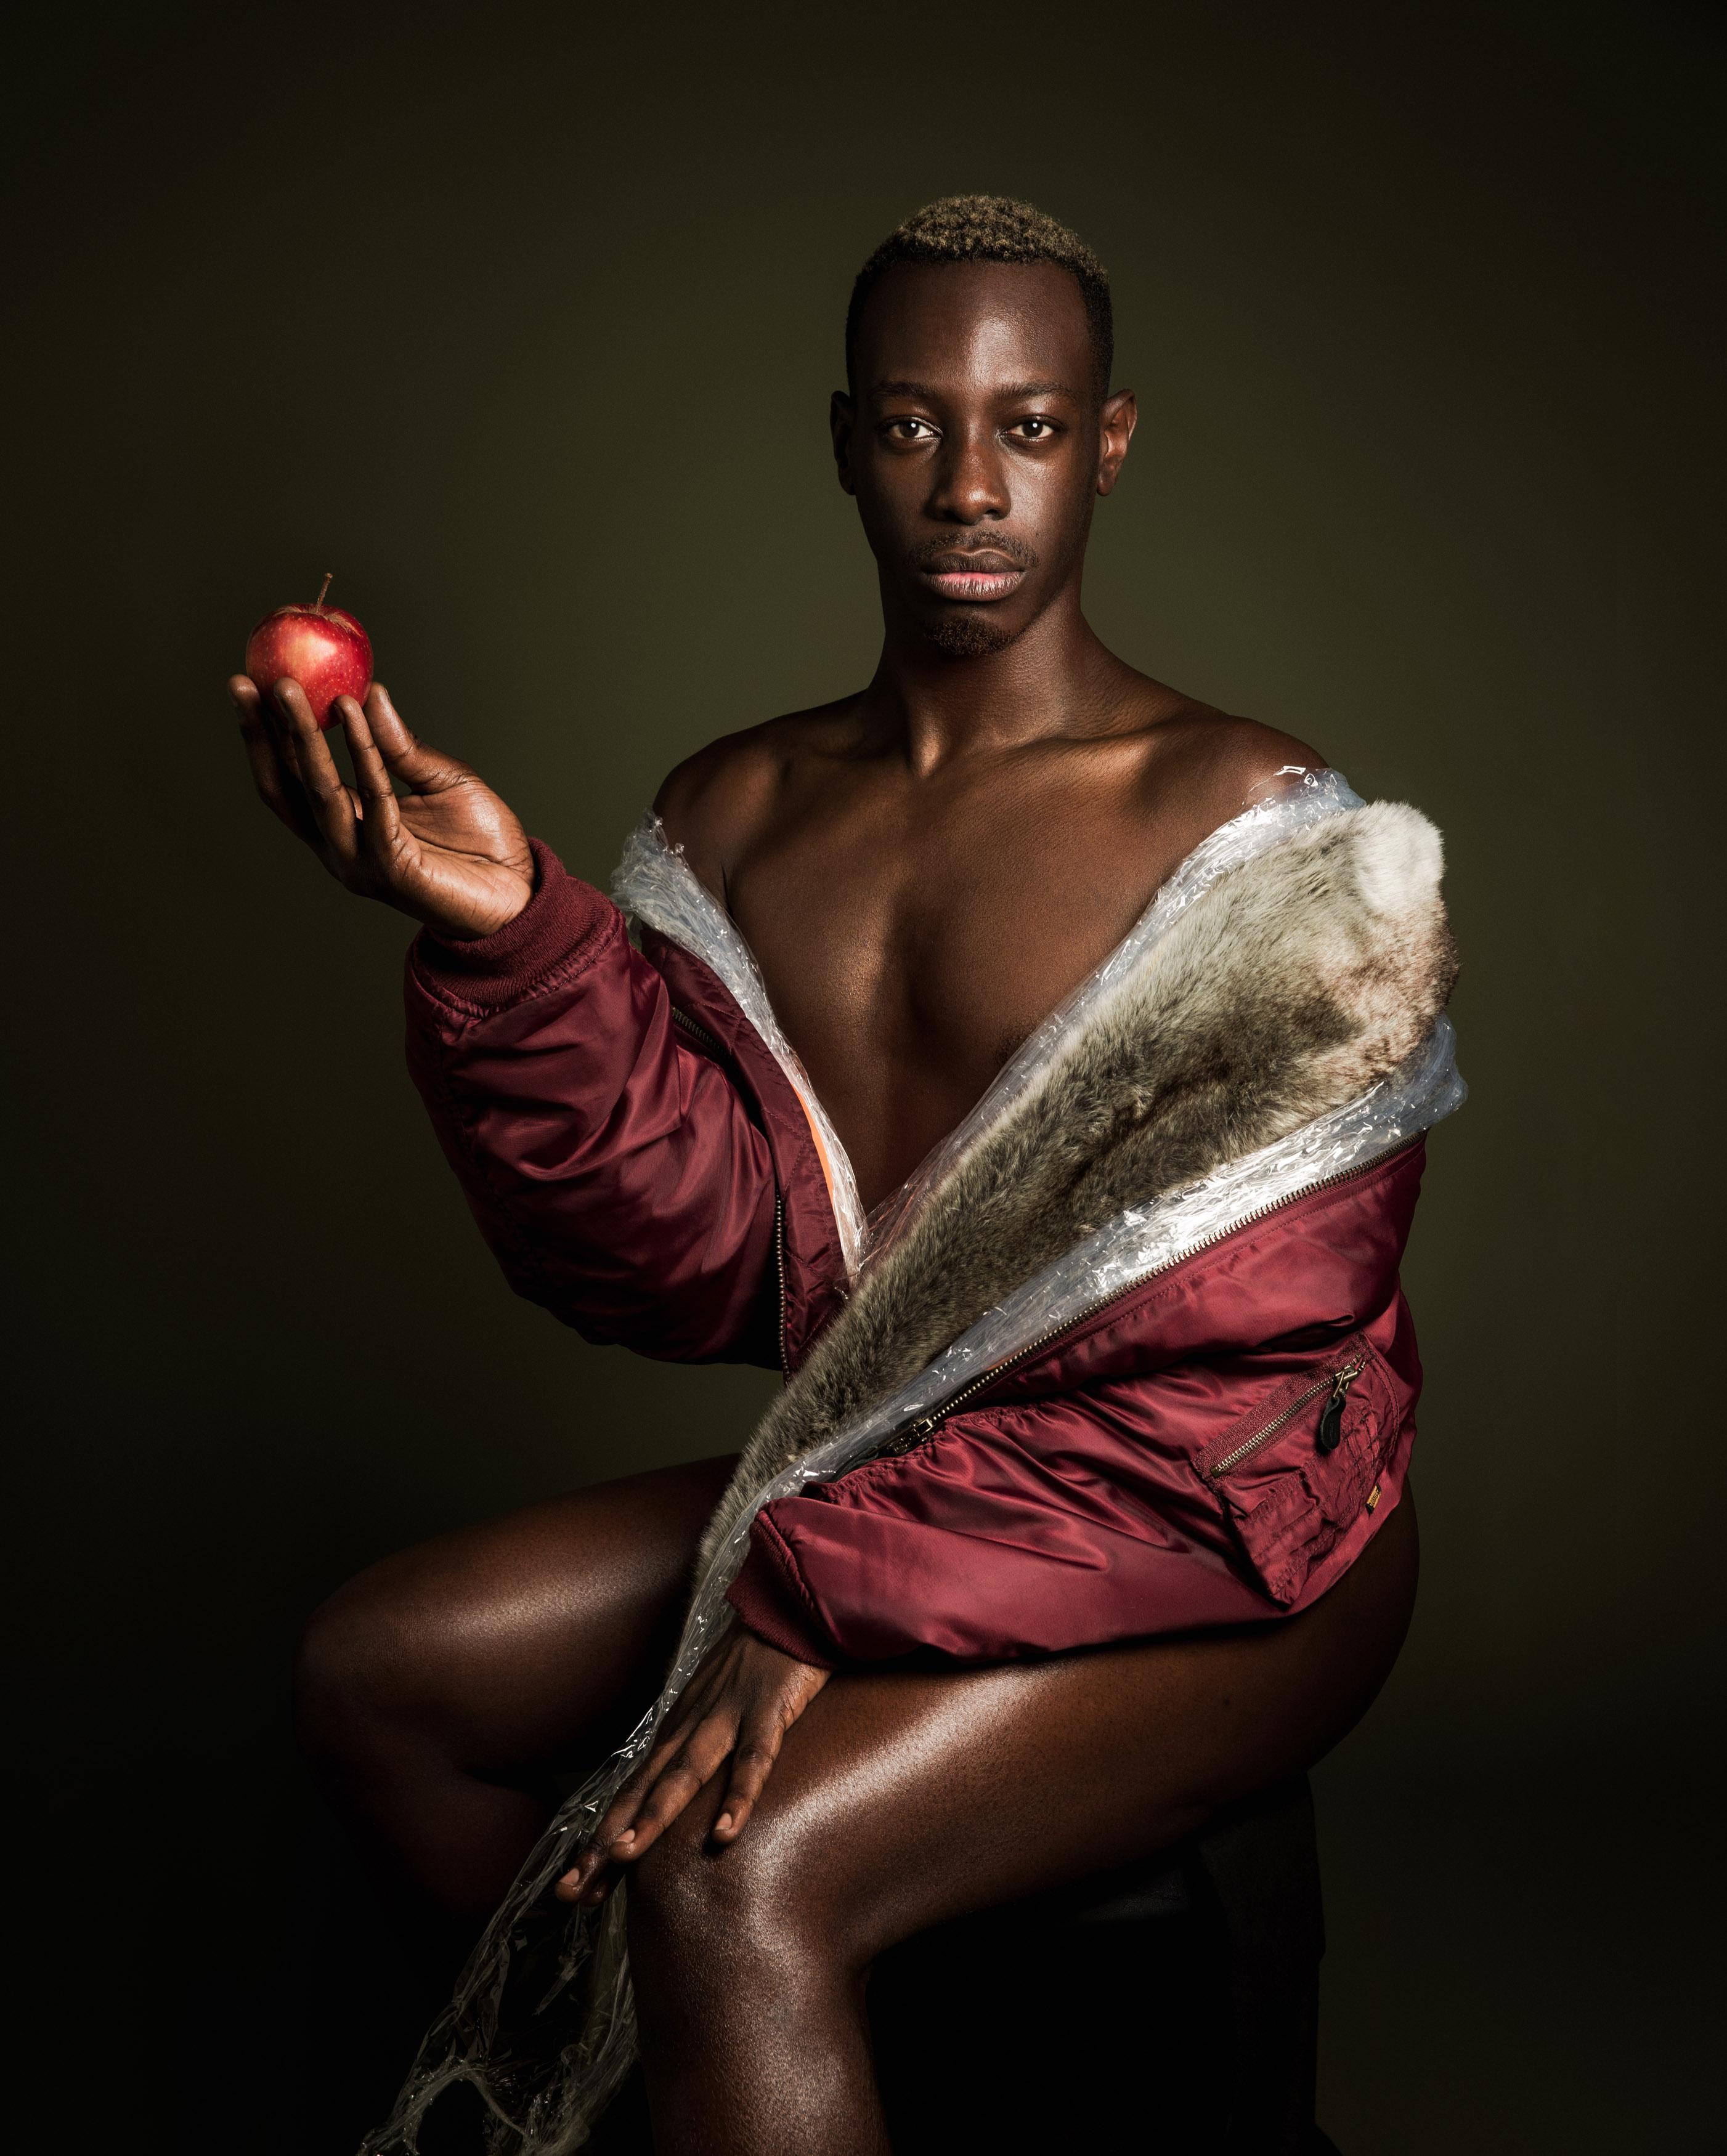 A dark-skinned person wears only a metallic, maroon, fur-lined jacket while seated, looking directly at the viewer and holding an apple in their right hand.